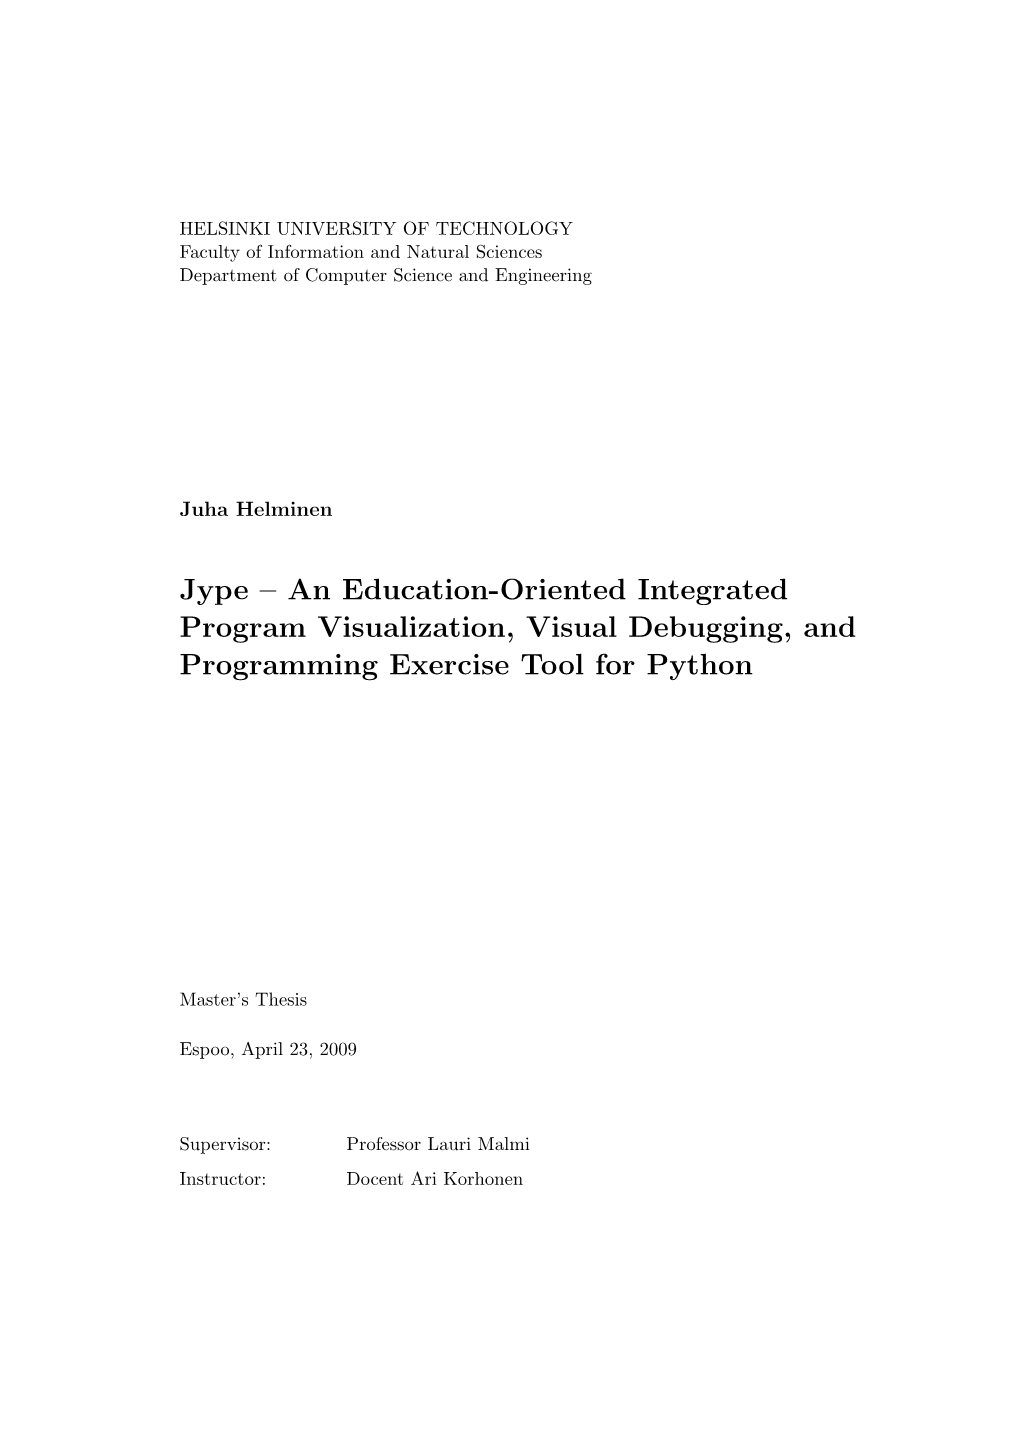 Jype -- an Education-Oriented Integrated Program Visualization, Visual Debugging, and Programming Exercise Tool for Python